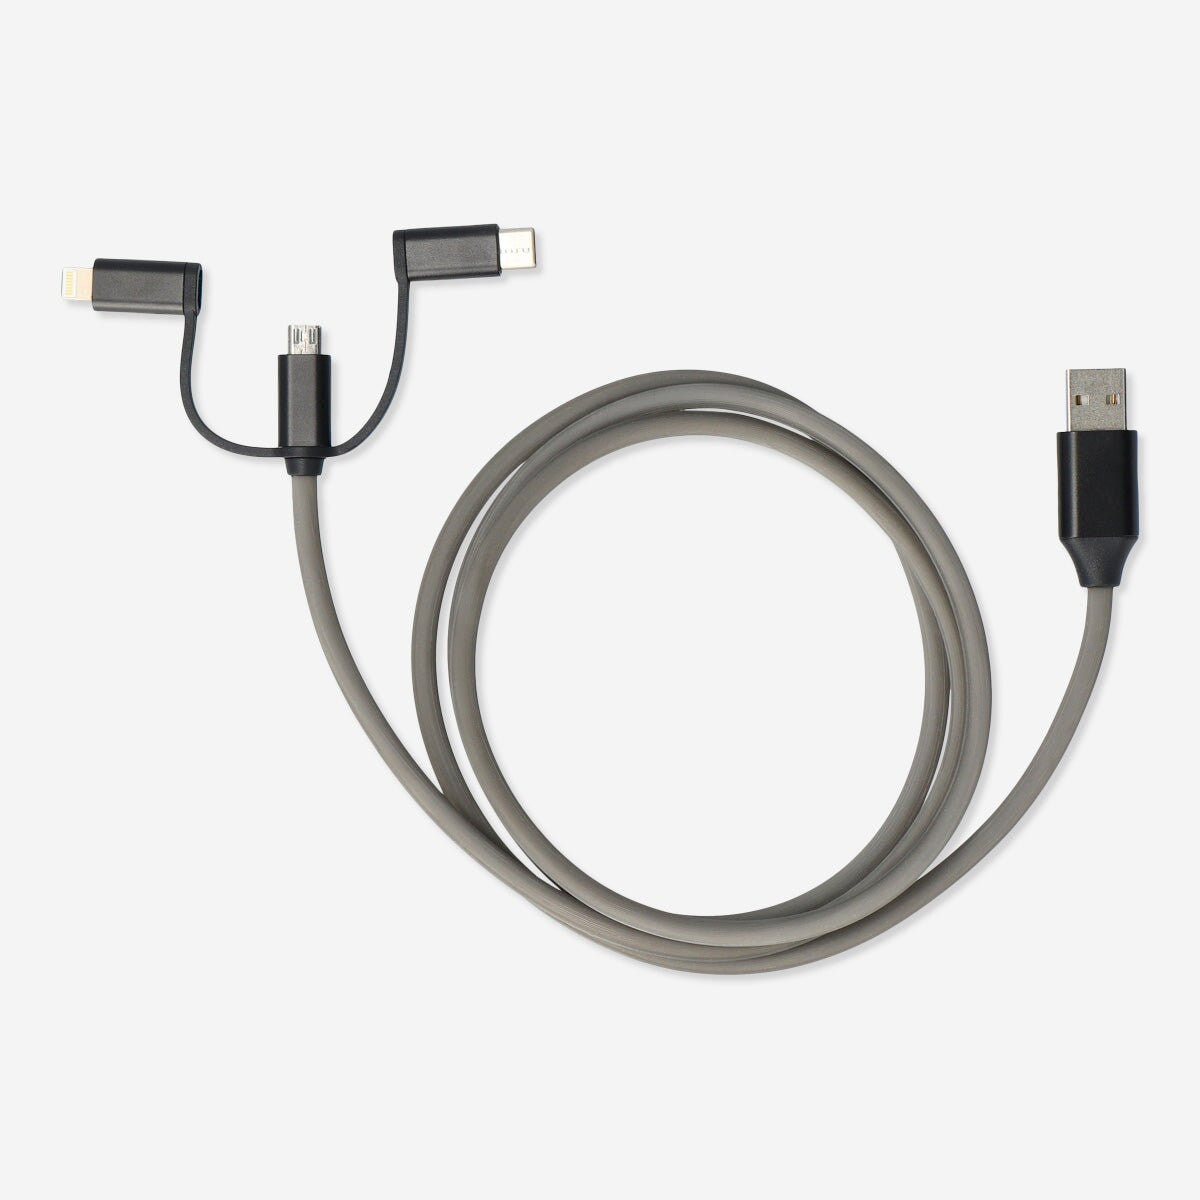 USB charging cable with light. Reacts to sound and music Media Flying Tiger Copenhagen 